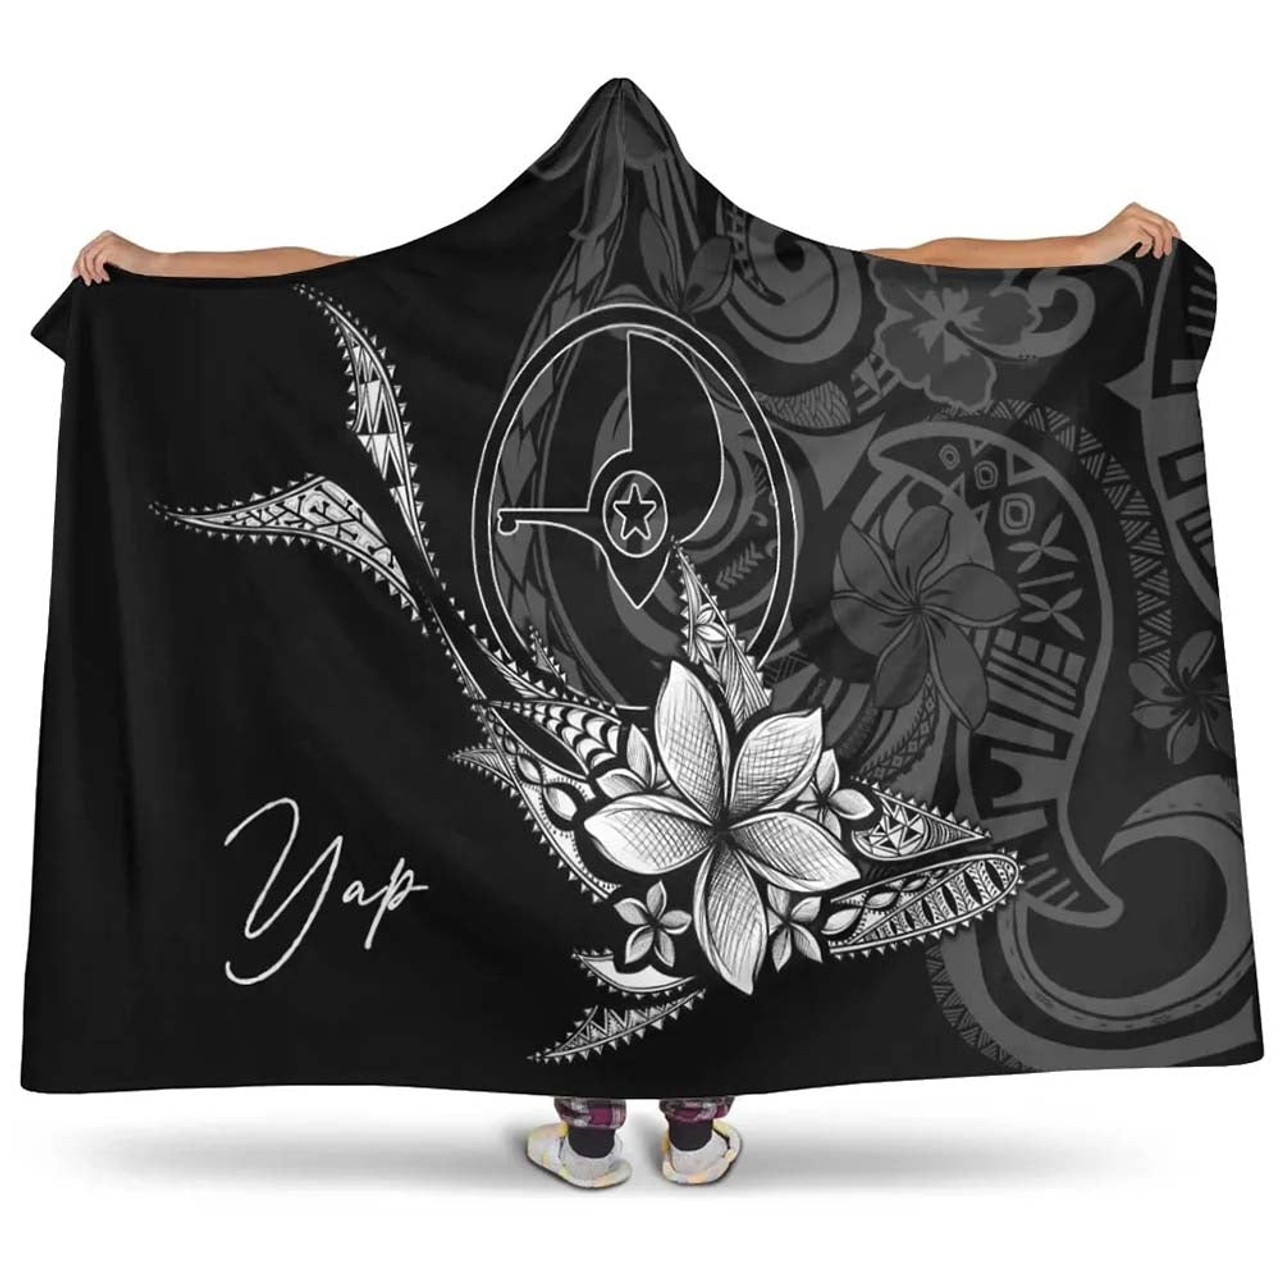 Yap State Hooded Blanket - Fish With Plumeria Flowers Style 1